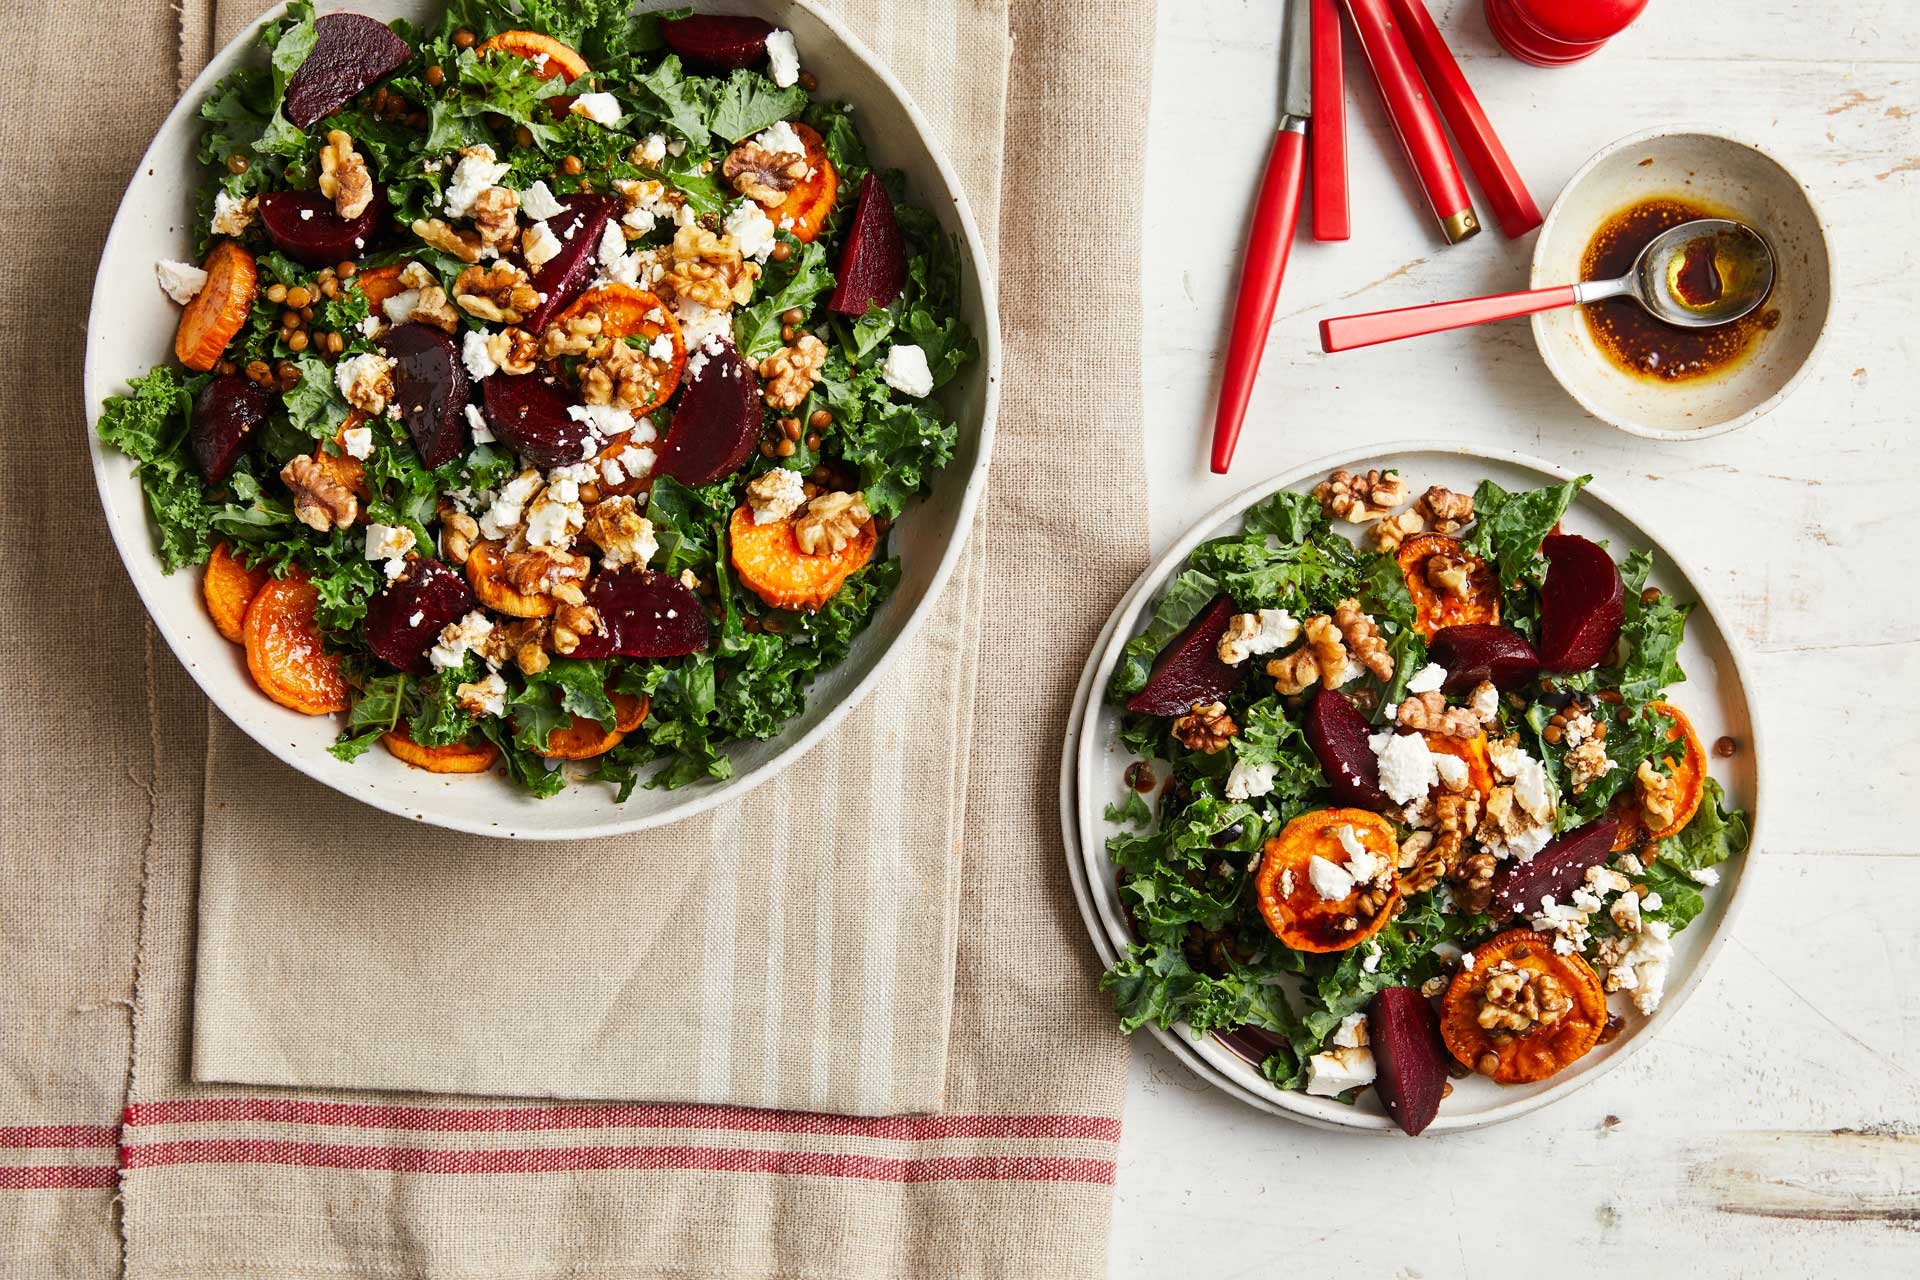 A colorful salad with beets, carrots, and creamy goat cheese. A flavourful healthy and delicious option!